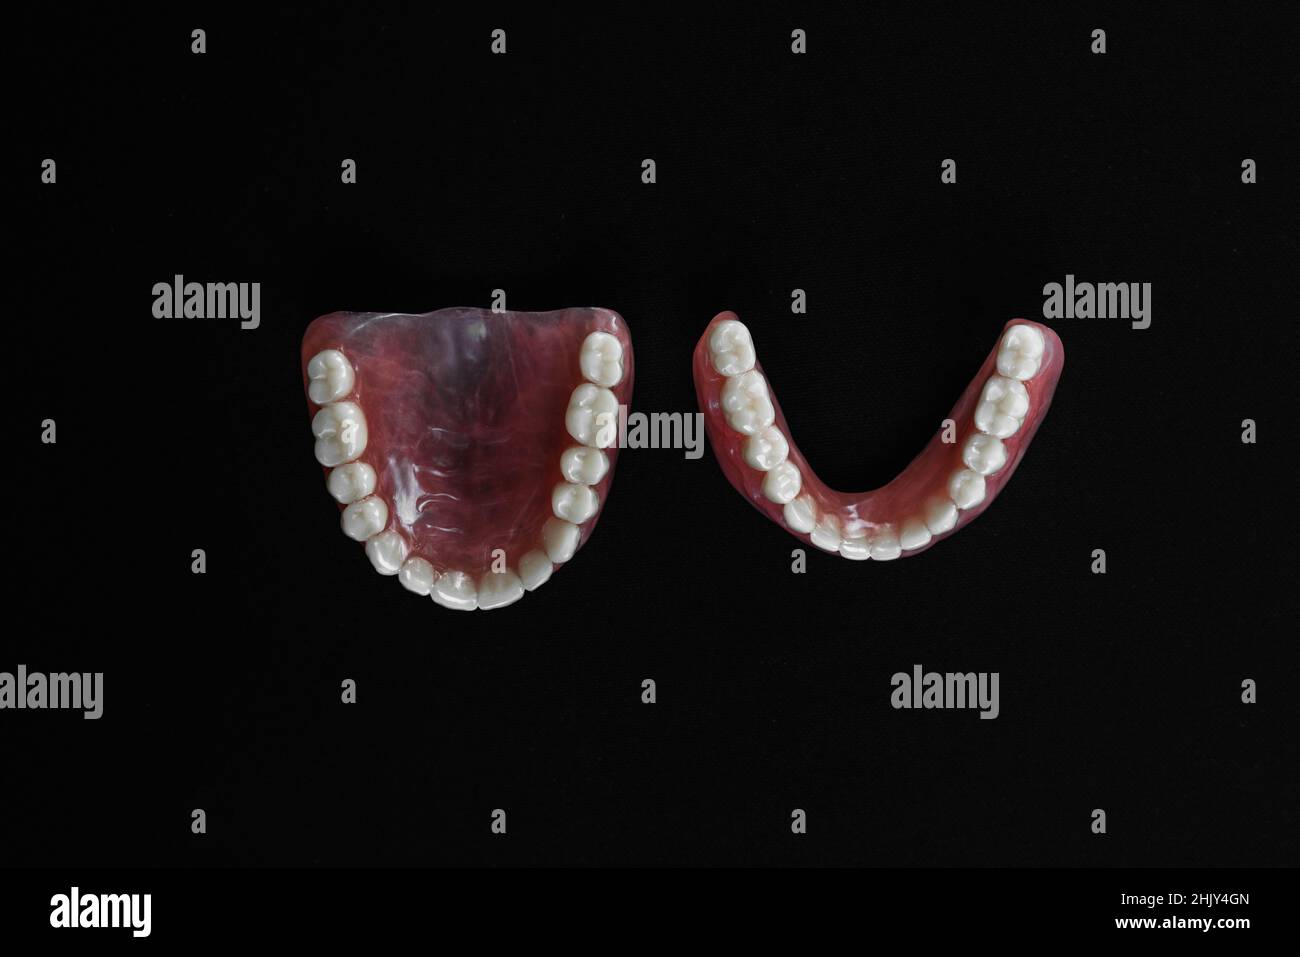 Full removable plastic denture of the jaws. A set of dentures on a black background. Two acrylic dentures. Upper and lower jaws with fake teeth. Dentu Stock Photo